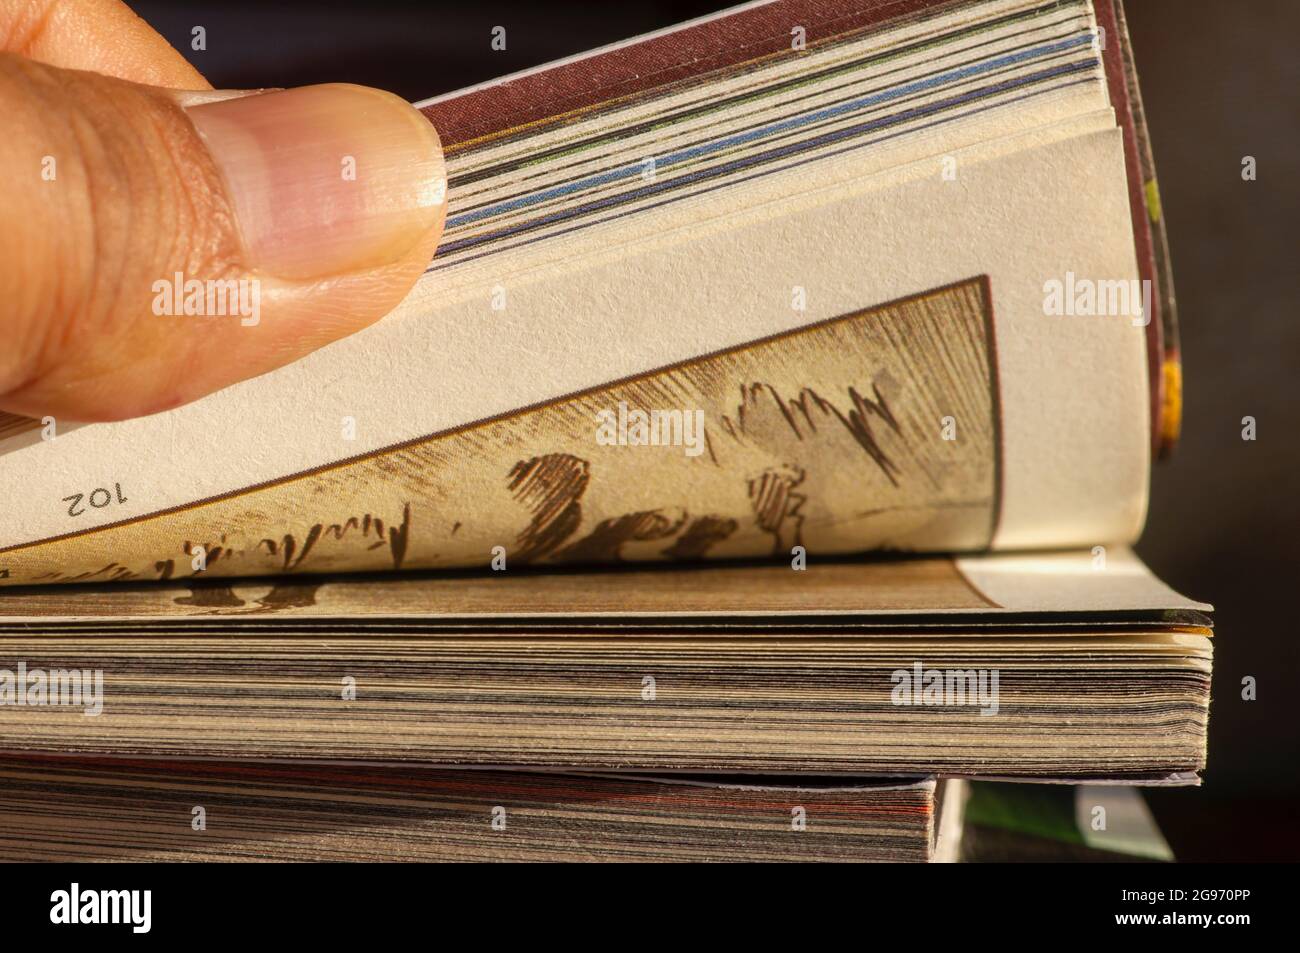 A thumb flipping pages of a comic book, selected focus. Stock Photo